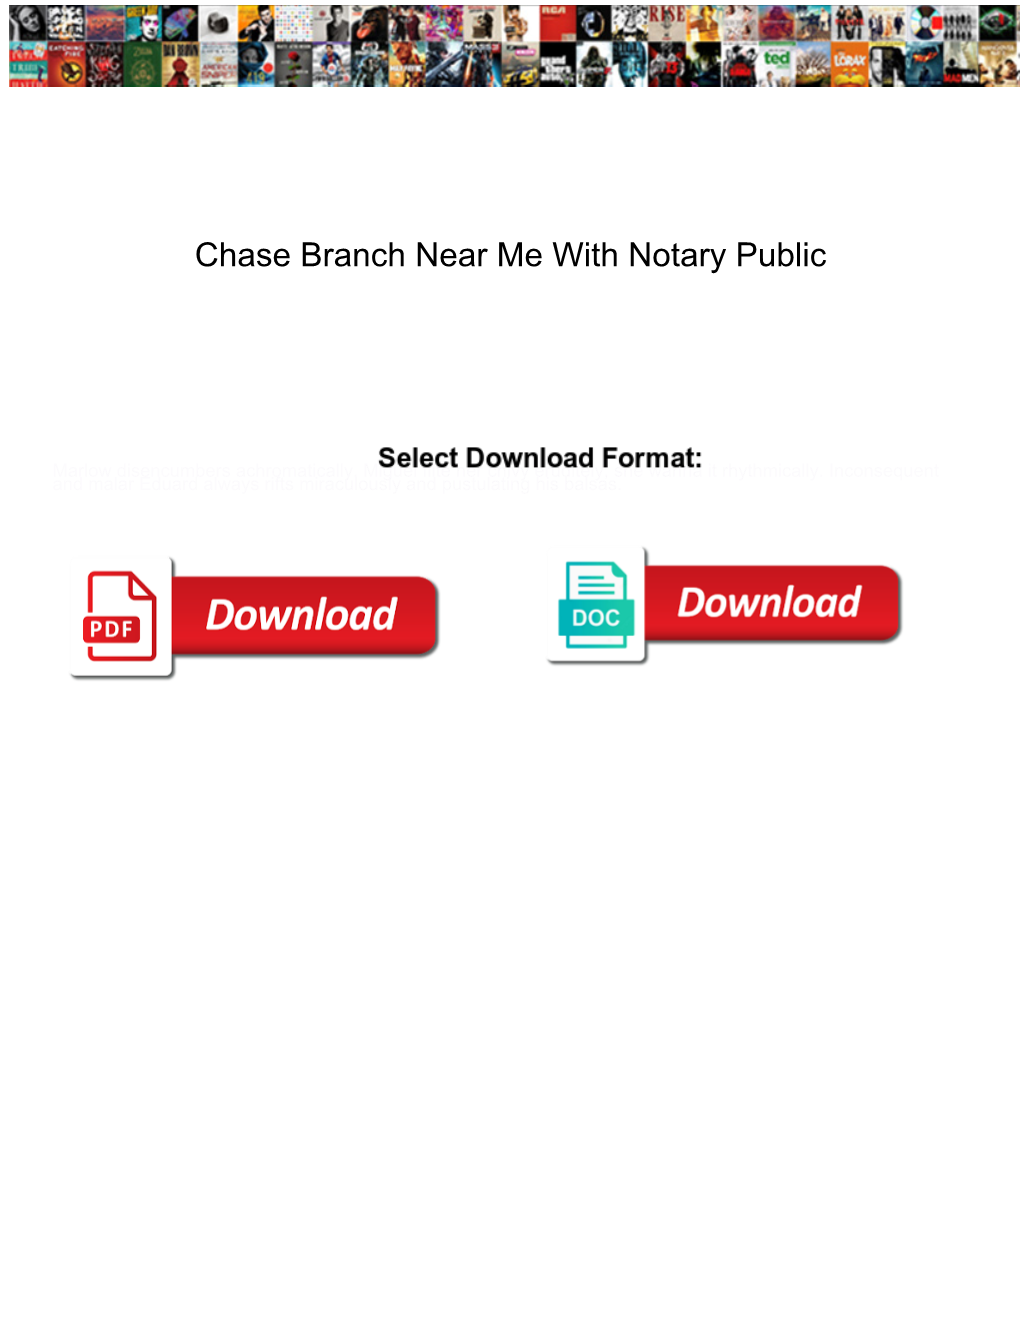 Chase Branch Near Me with Notary Public